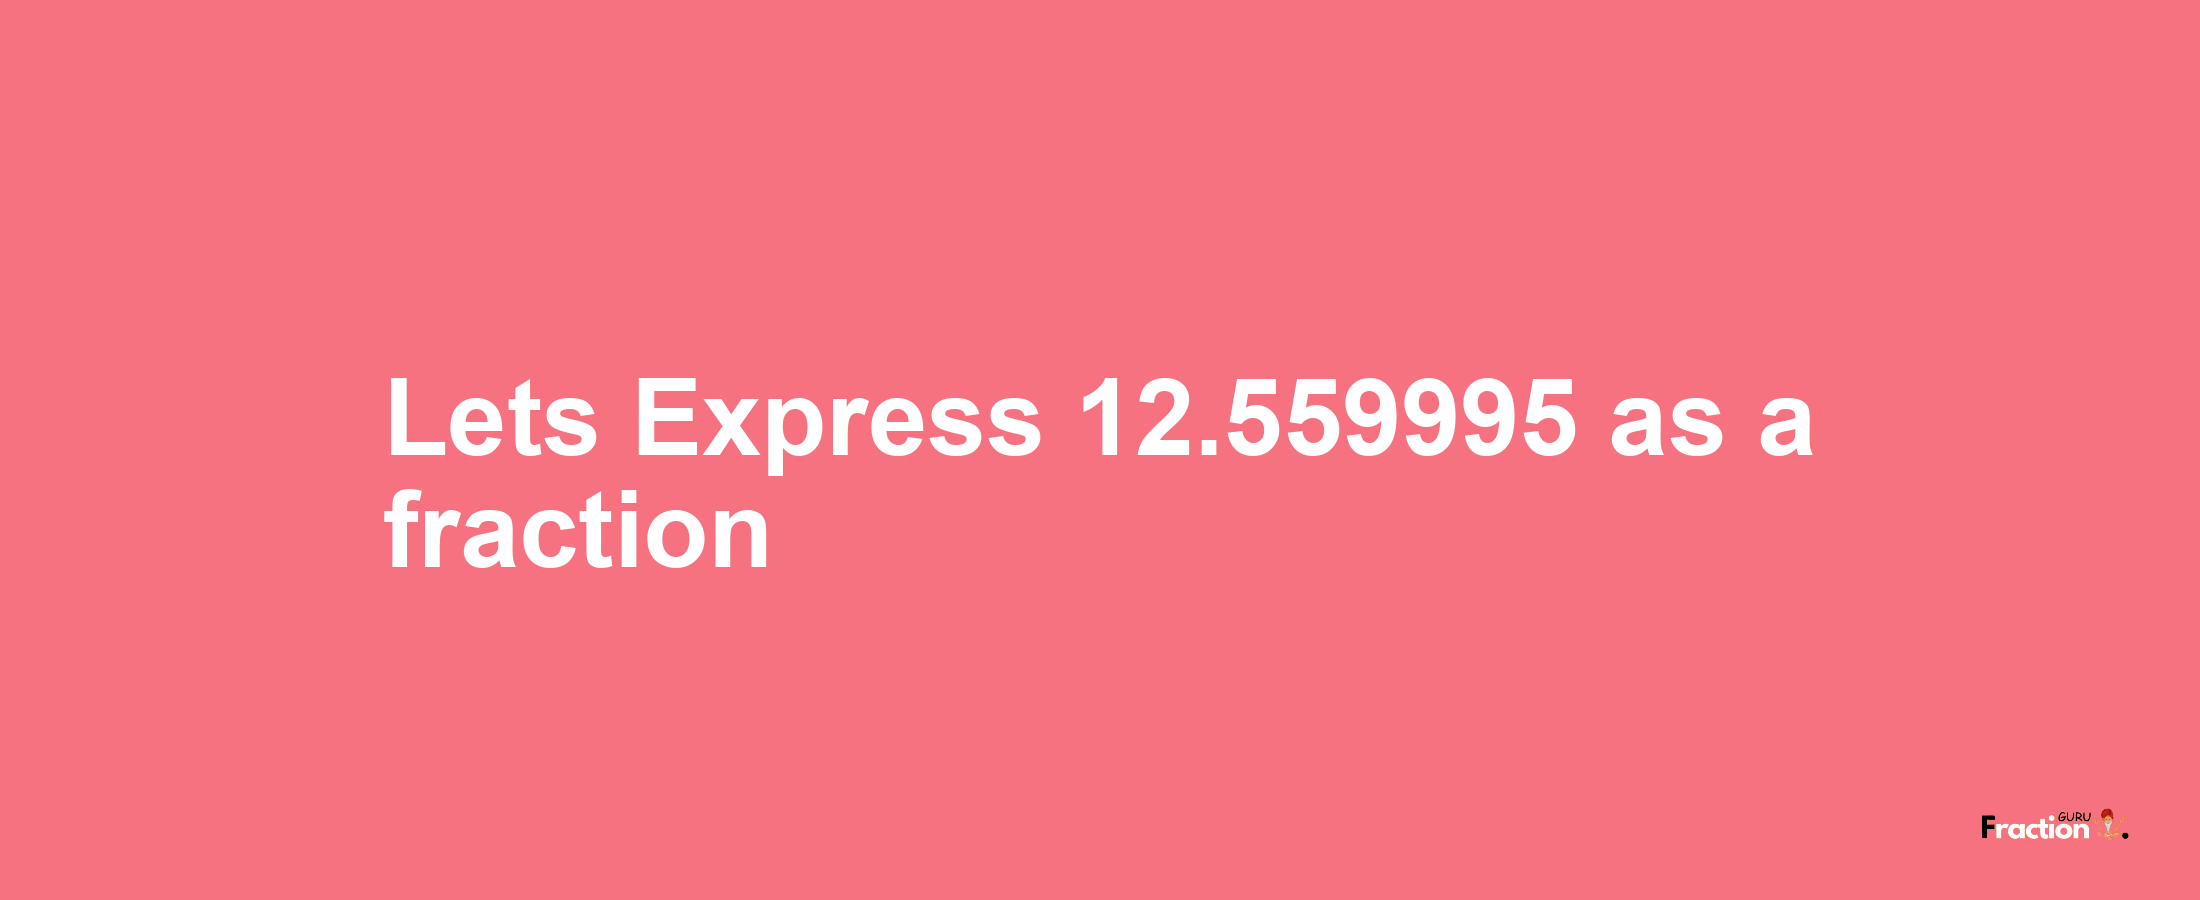 Lets Express 12.559995 as afraction